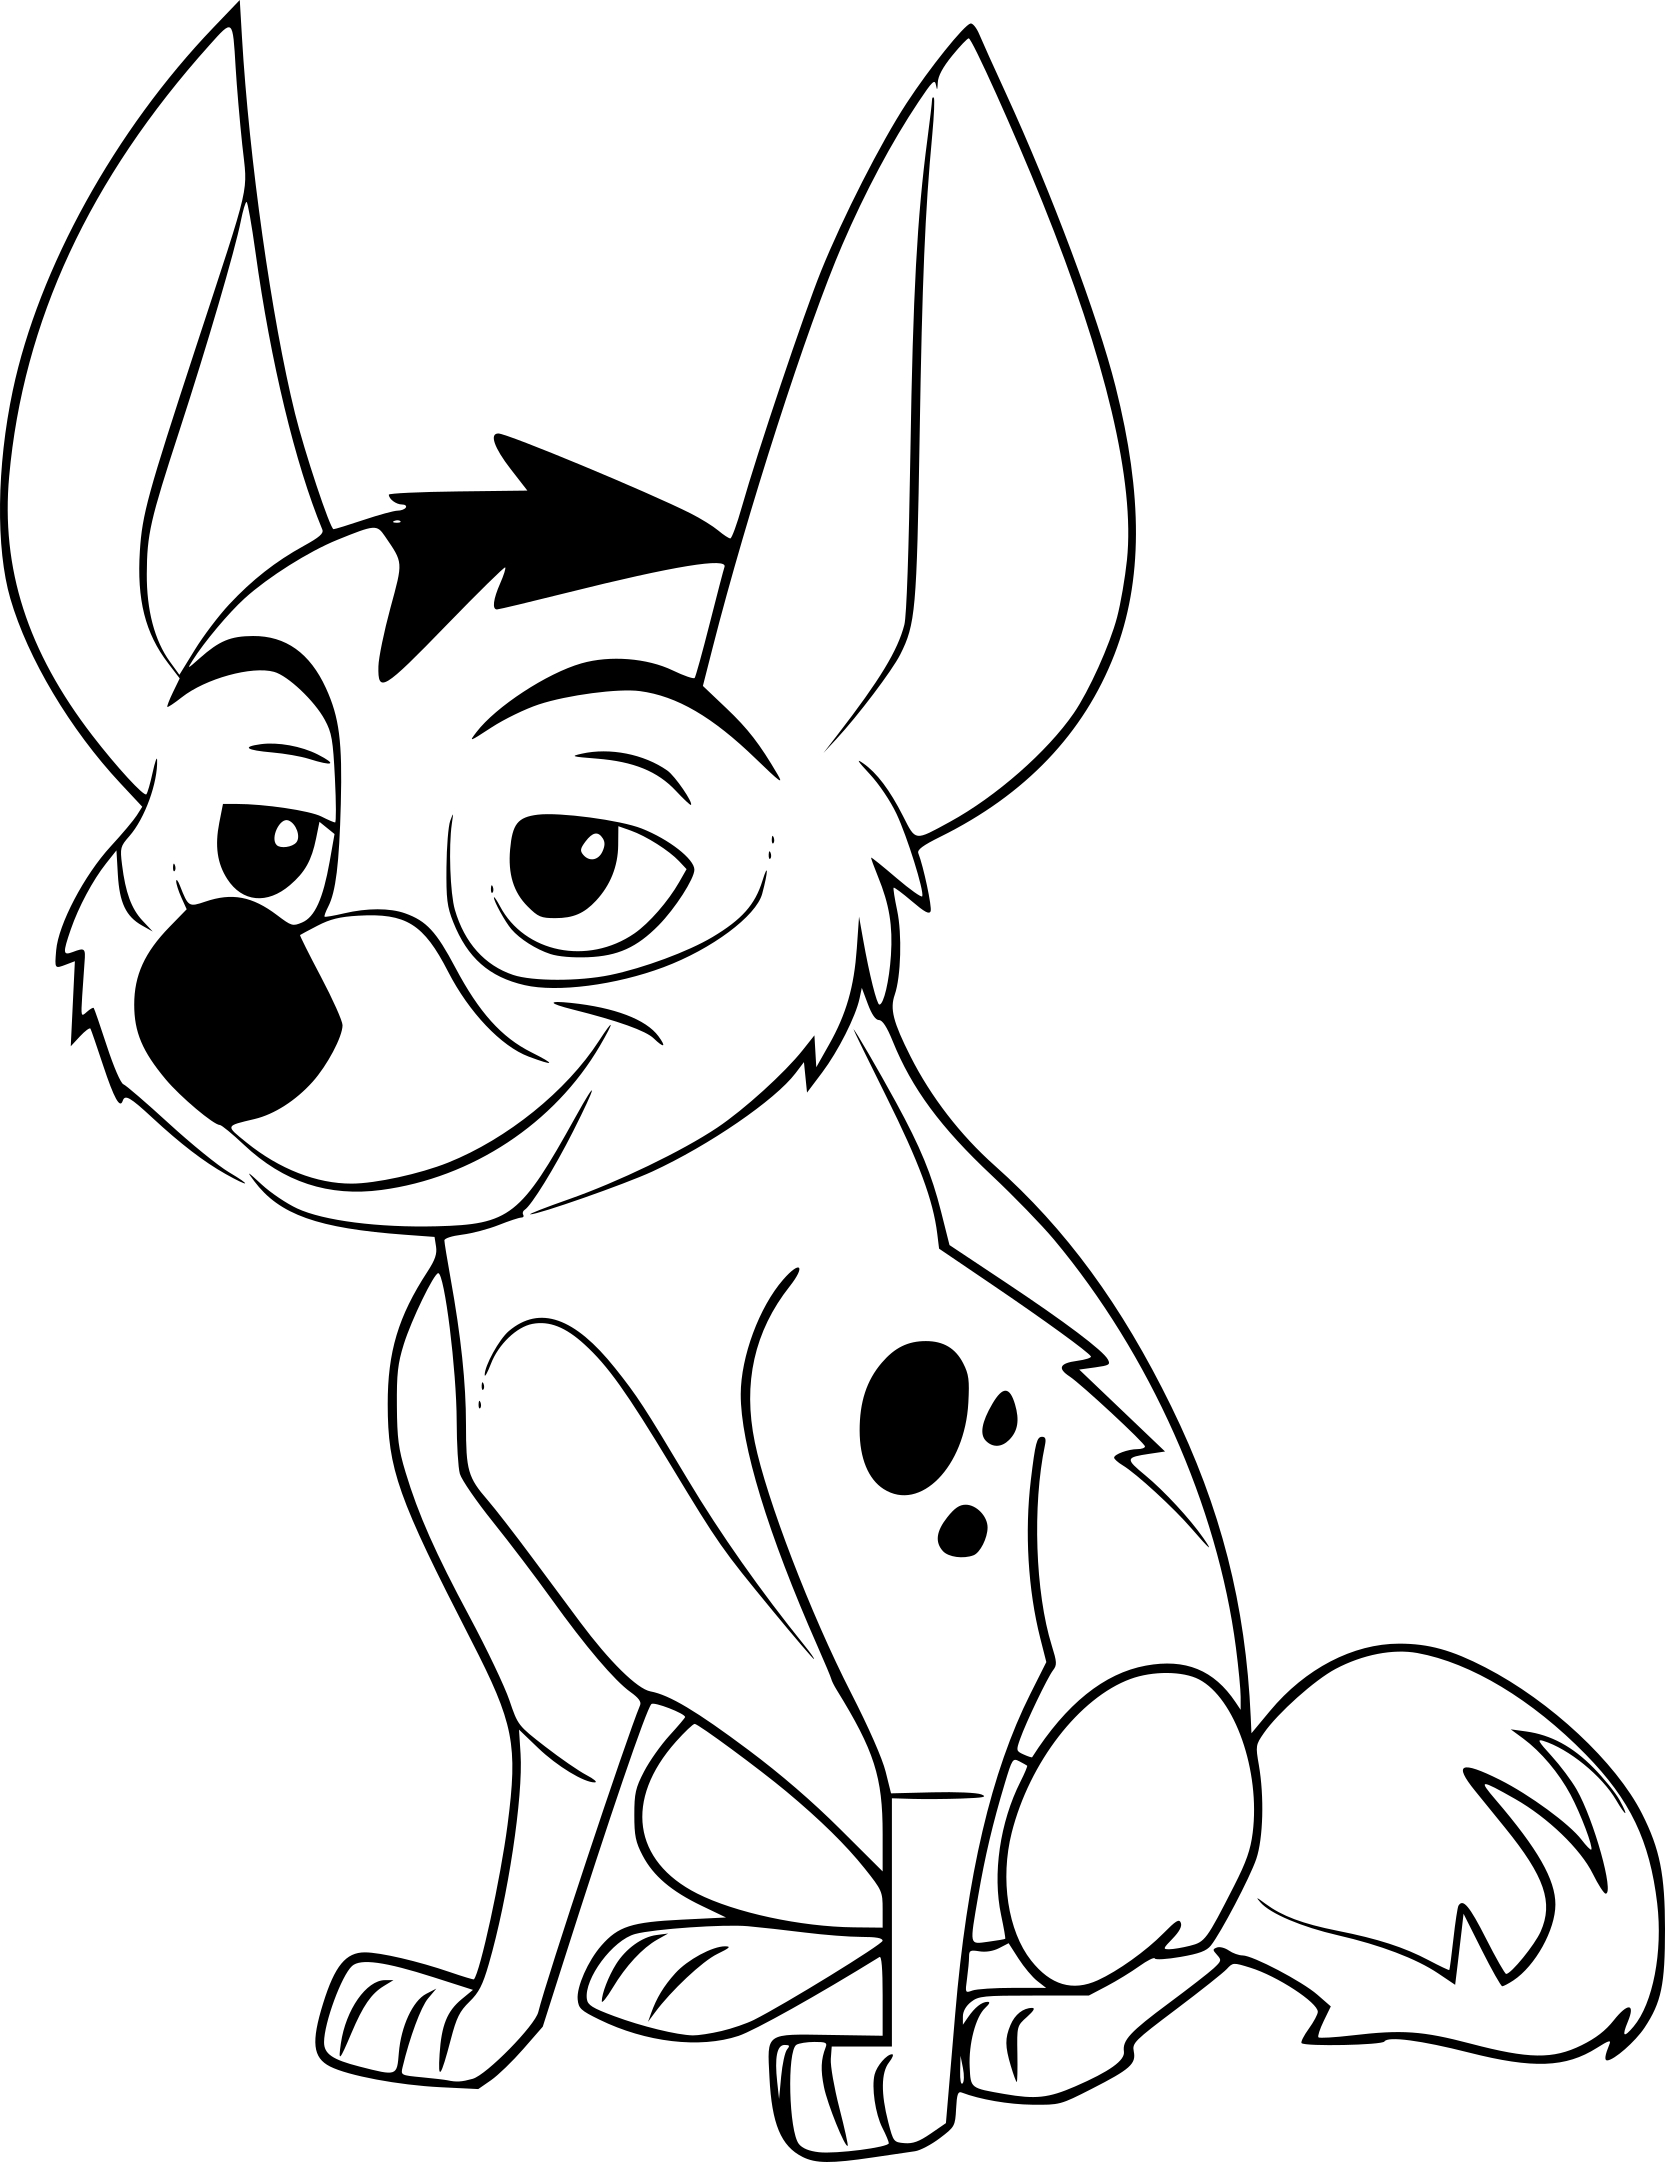 Dogo Guard Of The Lion King coloring page